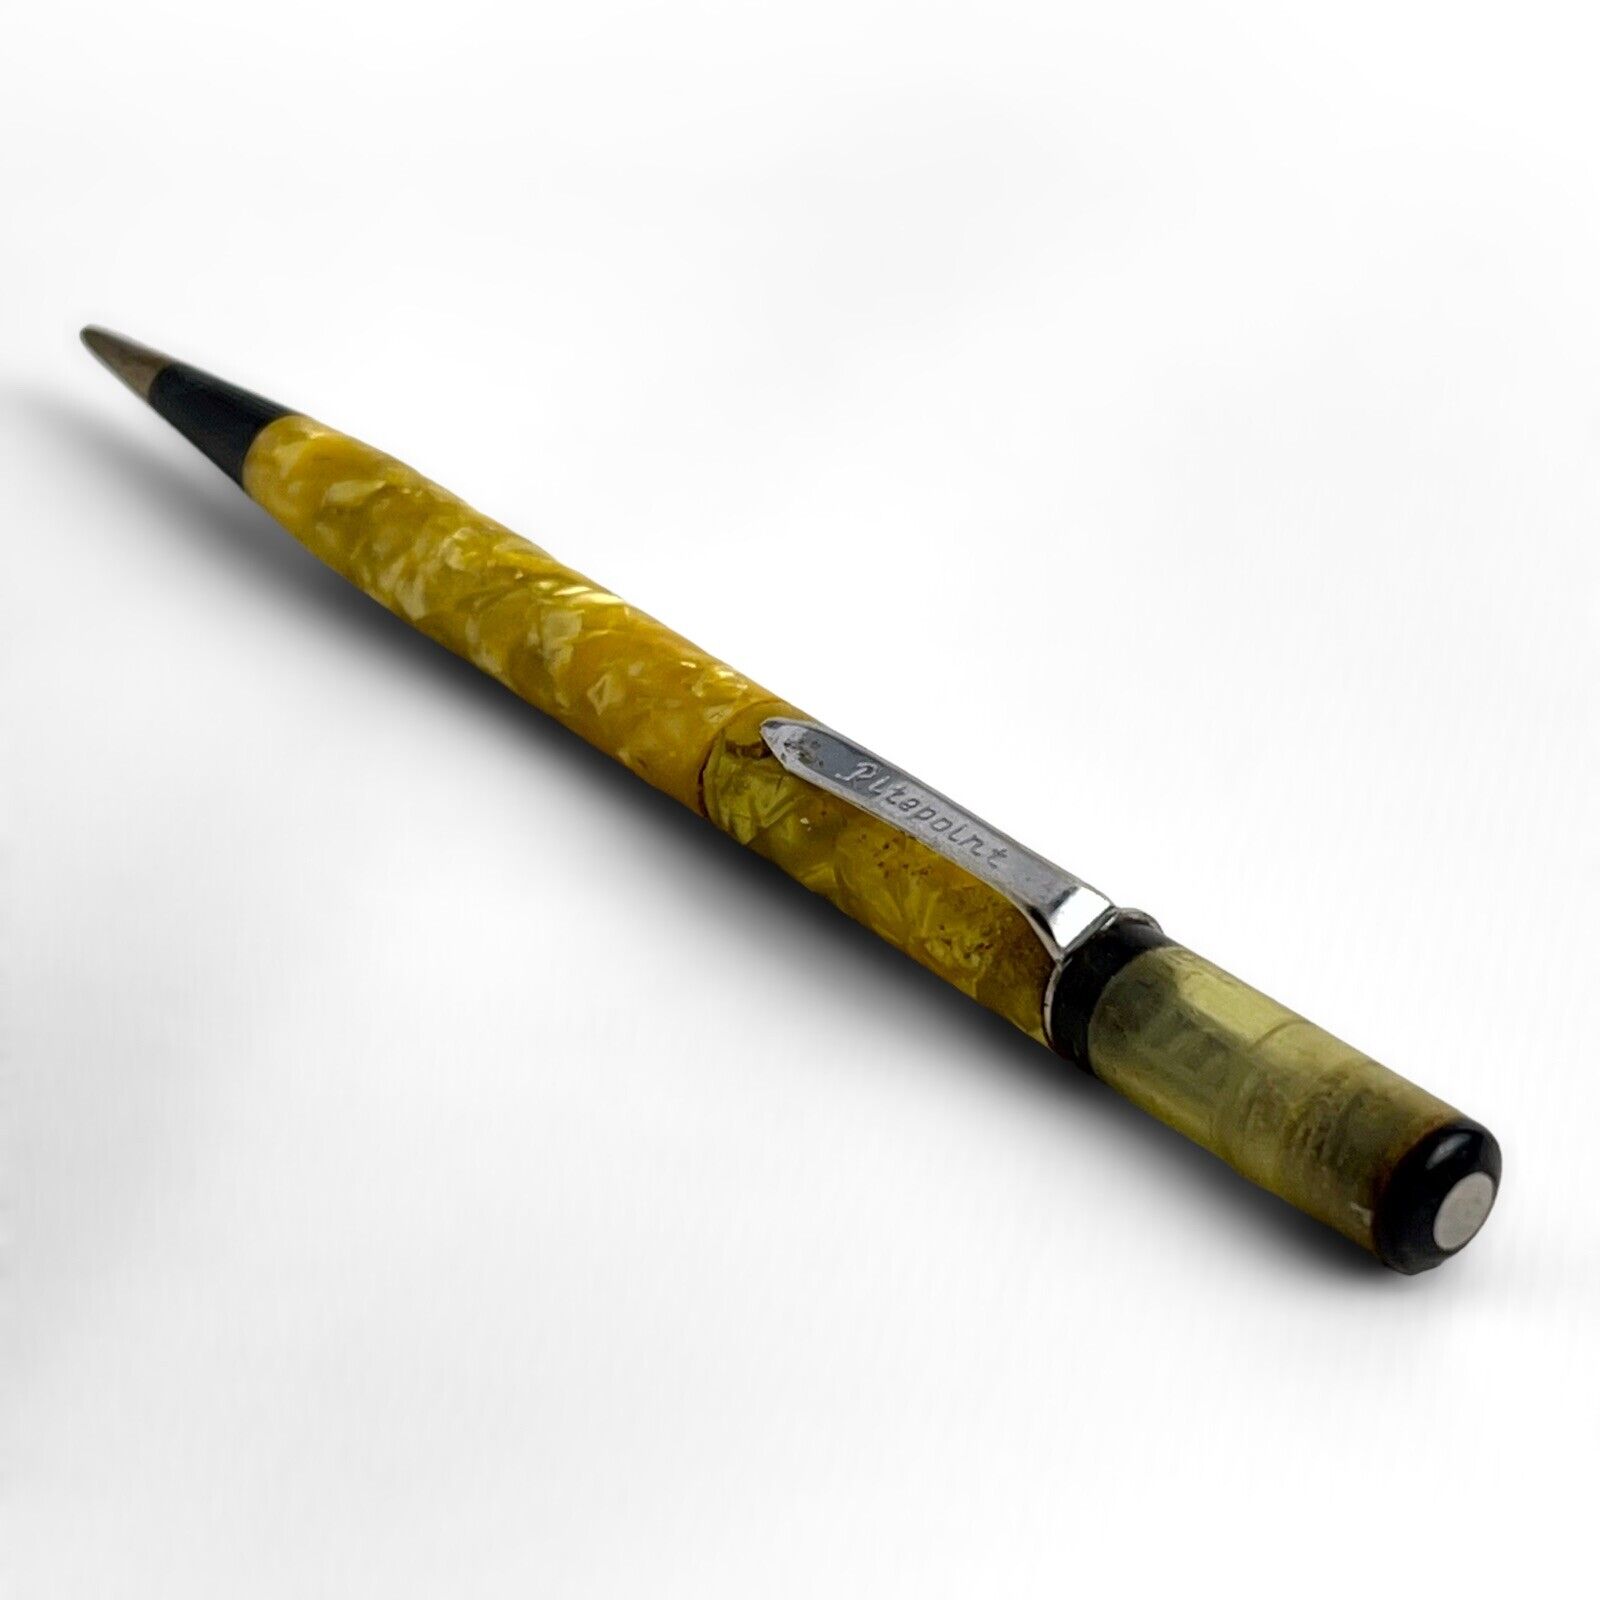 Vintage Ritepoint Cinder Block Floaty Mechanical Pencil Yellow